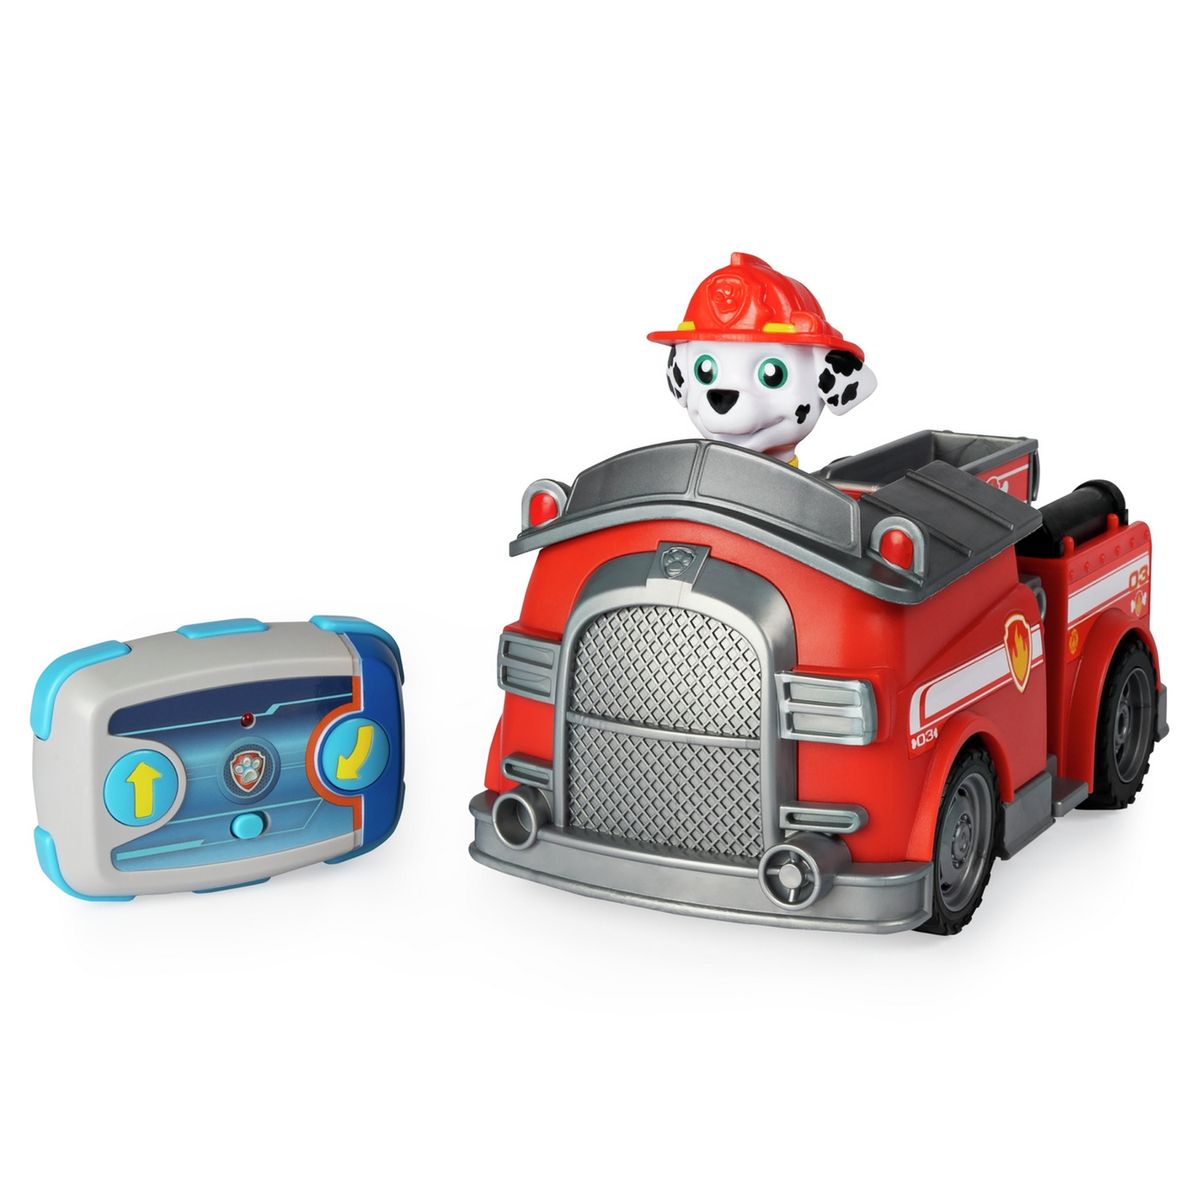 Black Friday Comes Early With Argos Huge Toy Deals On Lego Roblox Paw Patrol And More T3 - buy roblox twin pack assortment playsets and figures argos